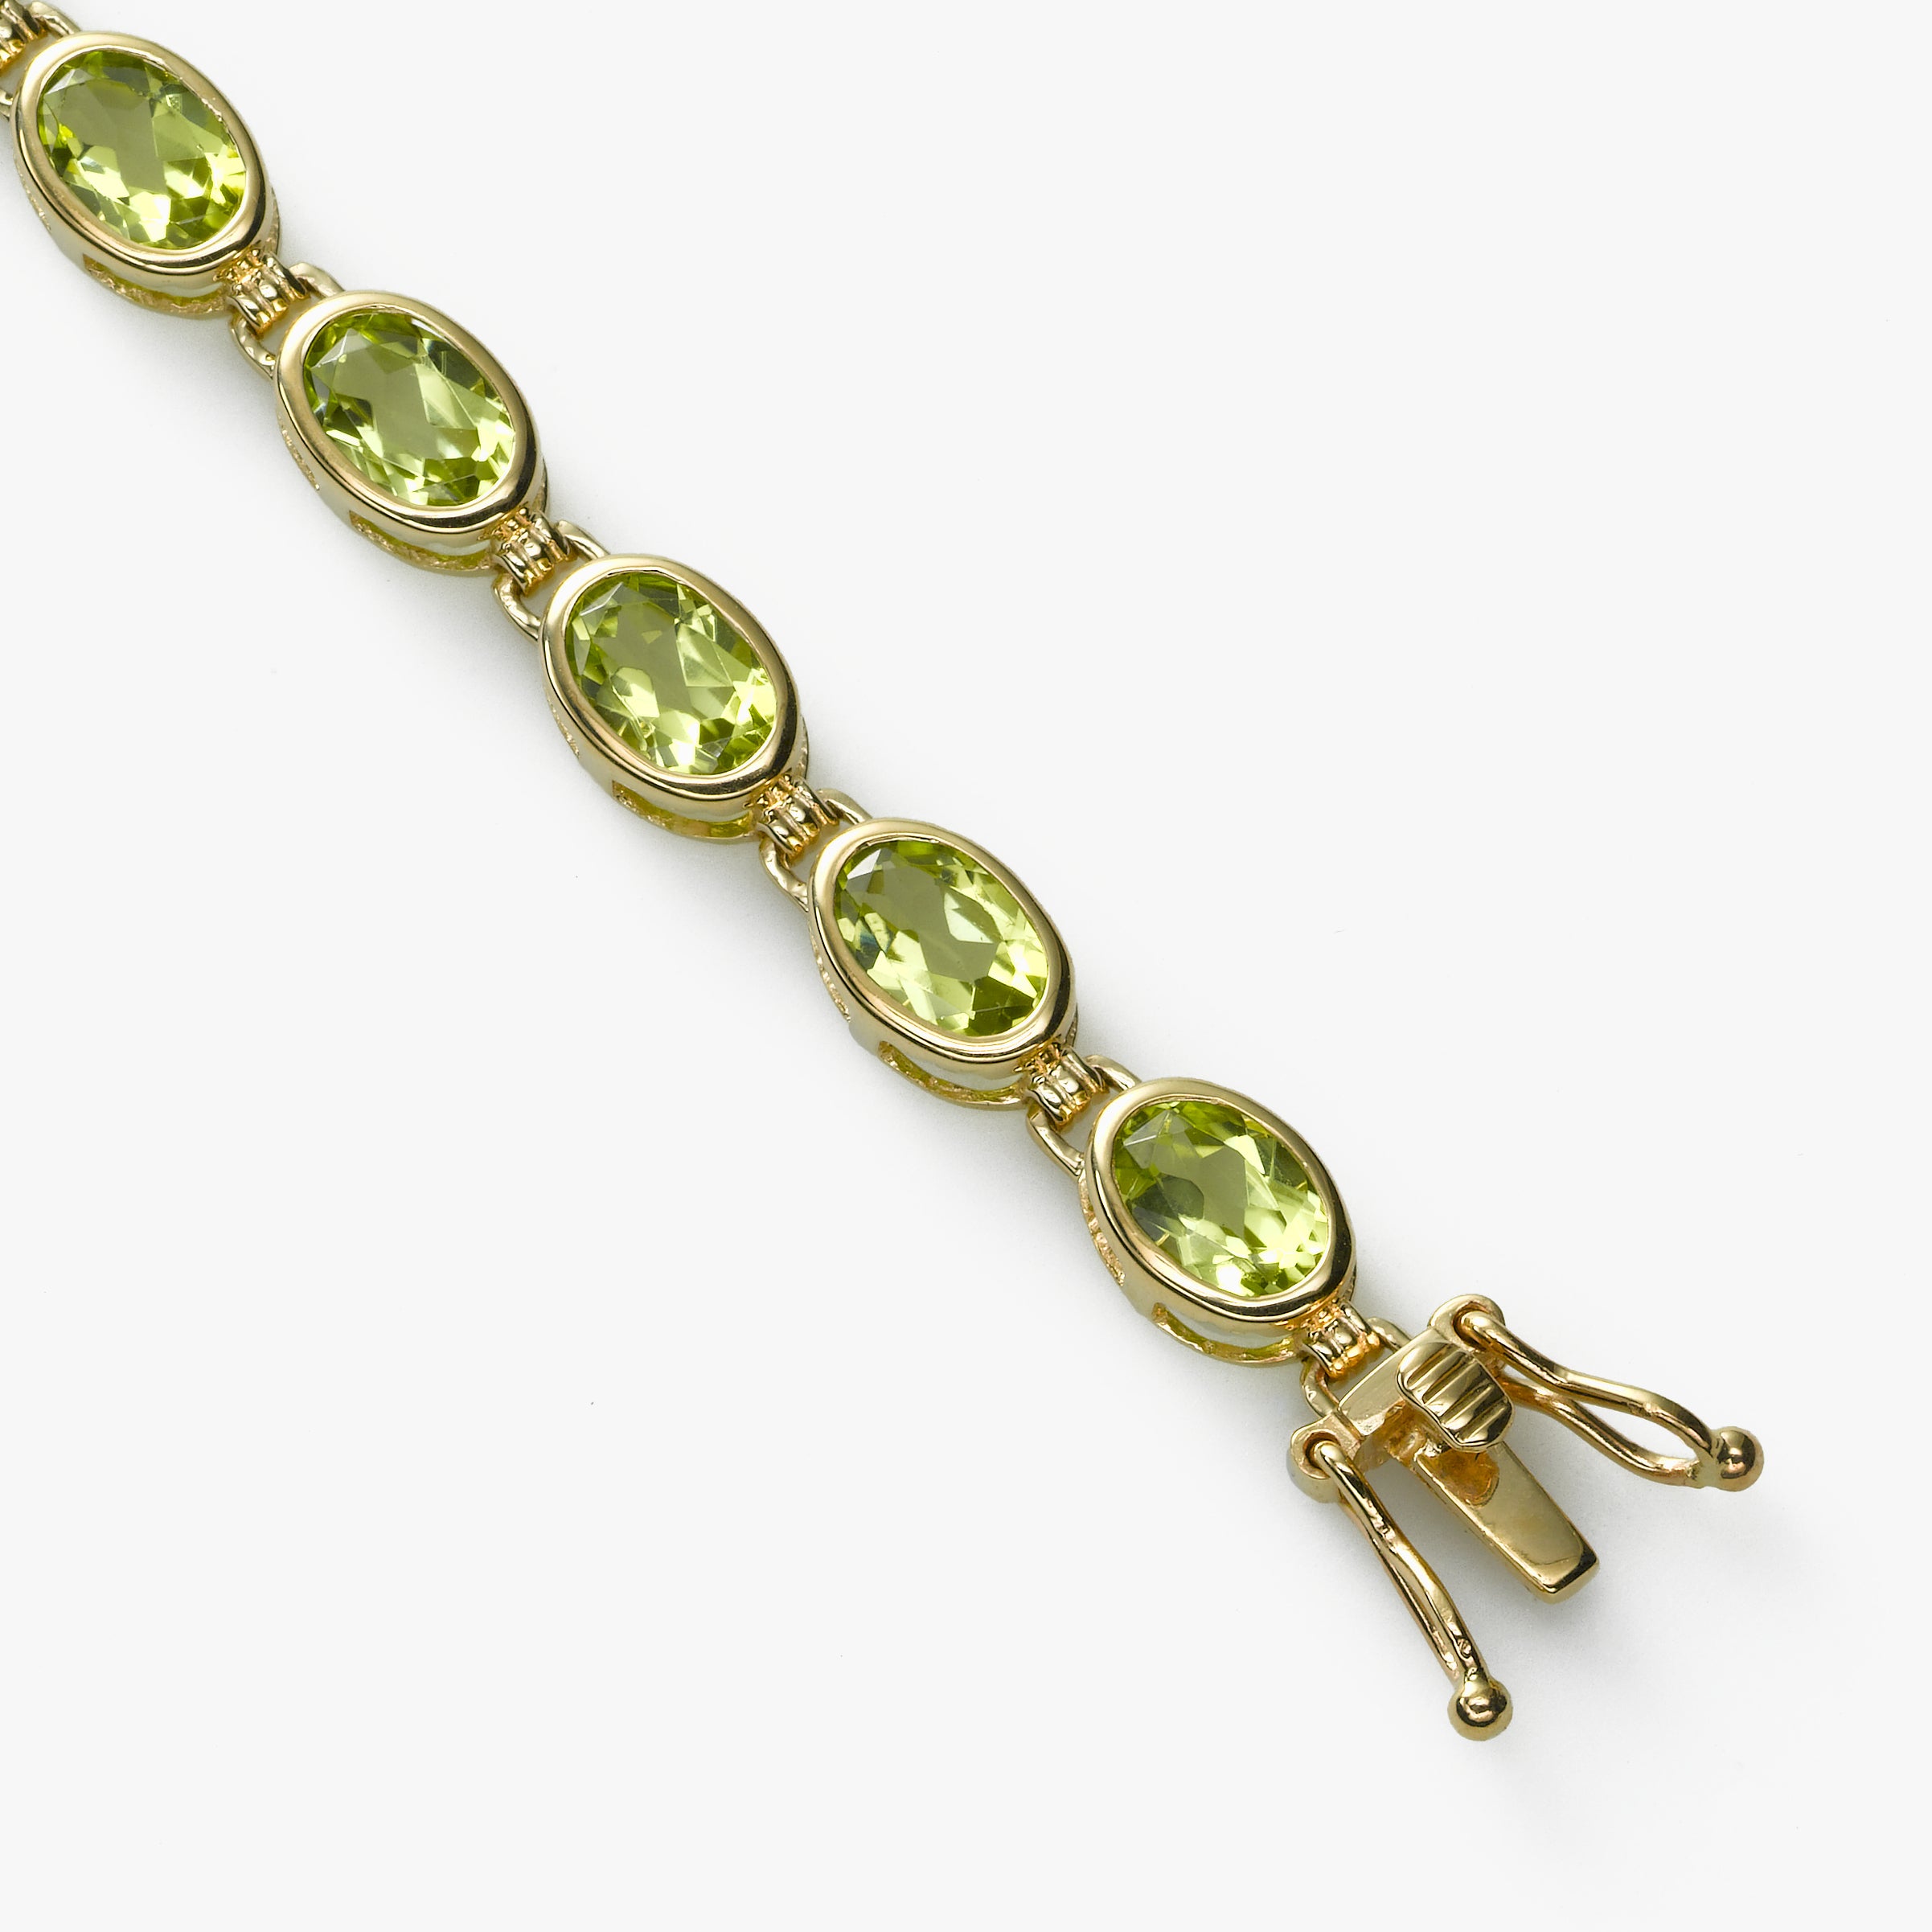 Green Gemstone Natural Peridot Stone Bracelet For Bad Habit And Addiction  at Rs 200/piece in Khambhat